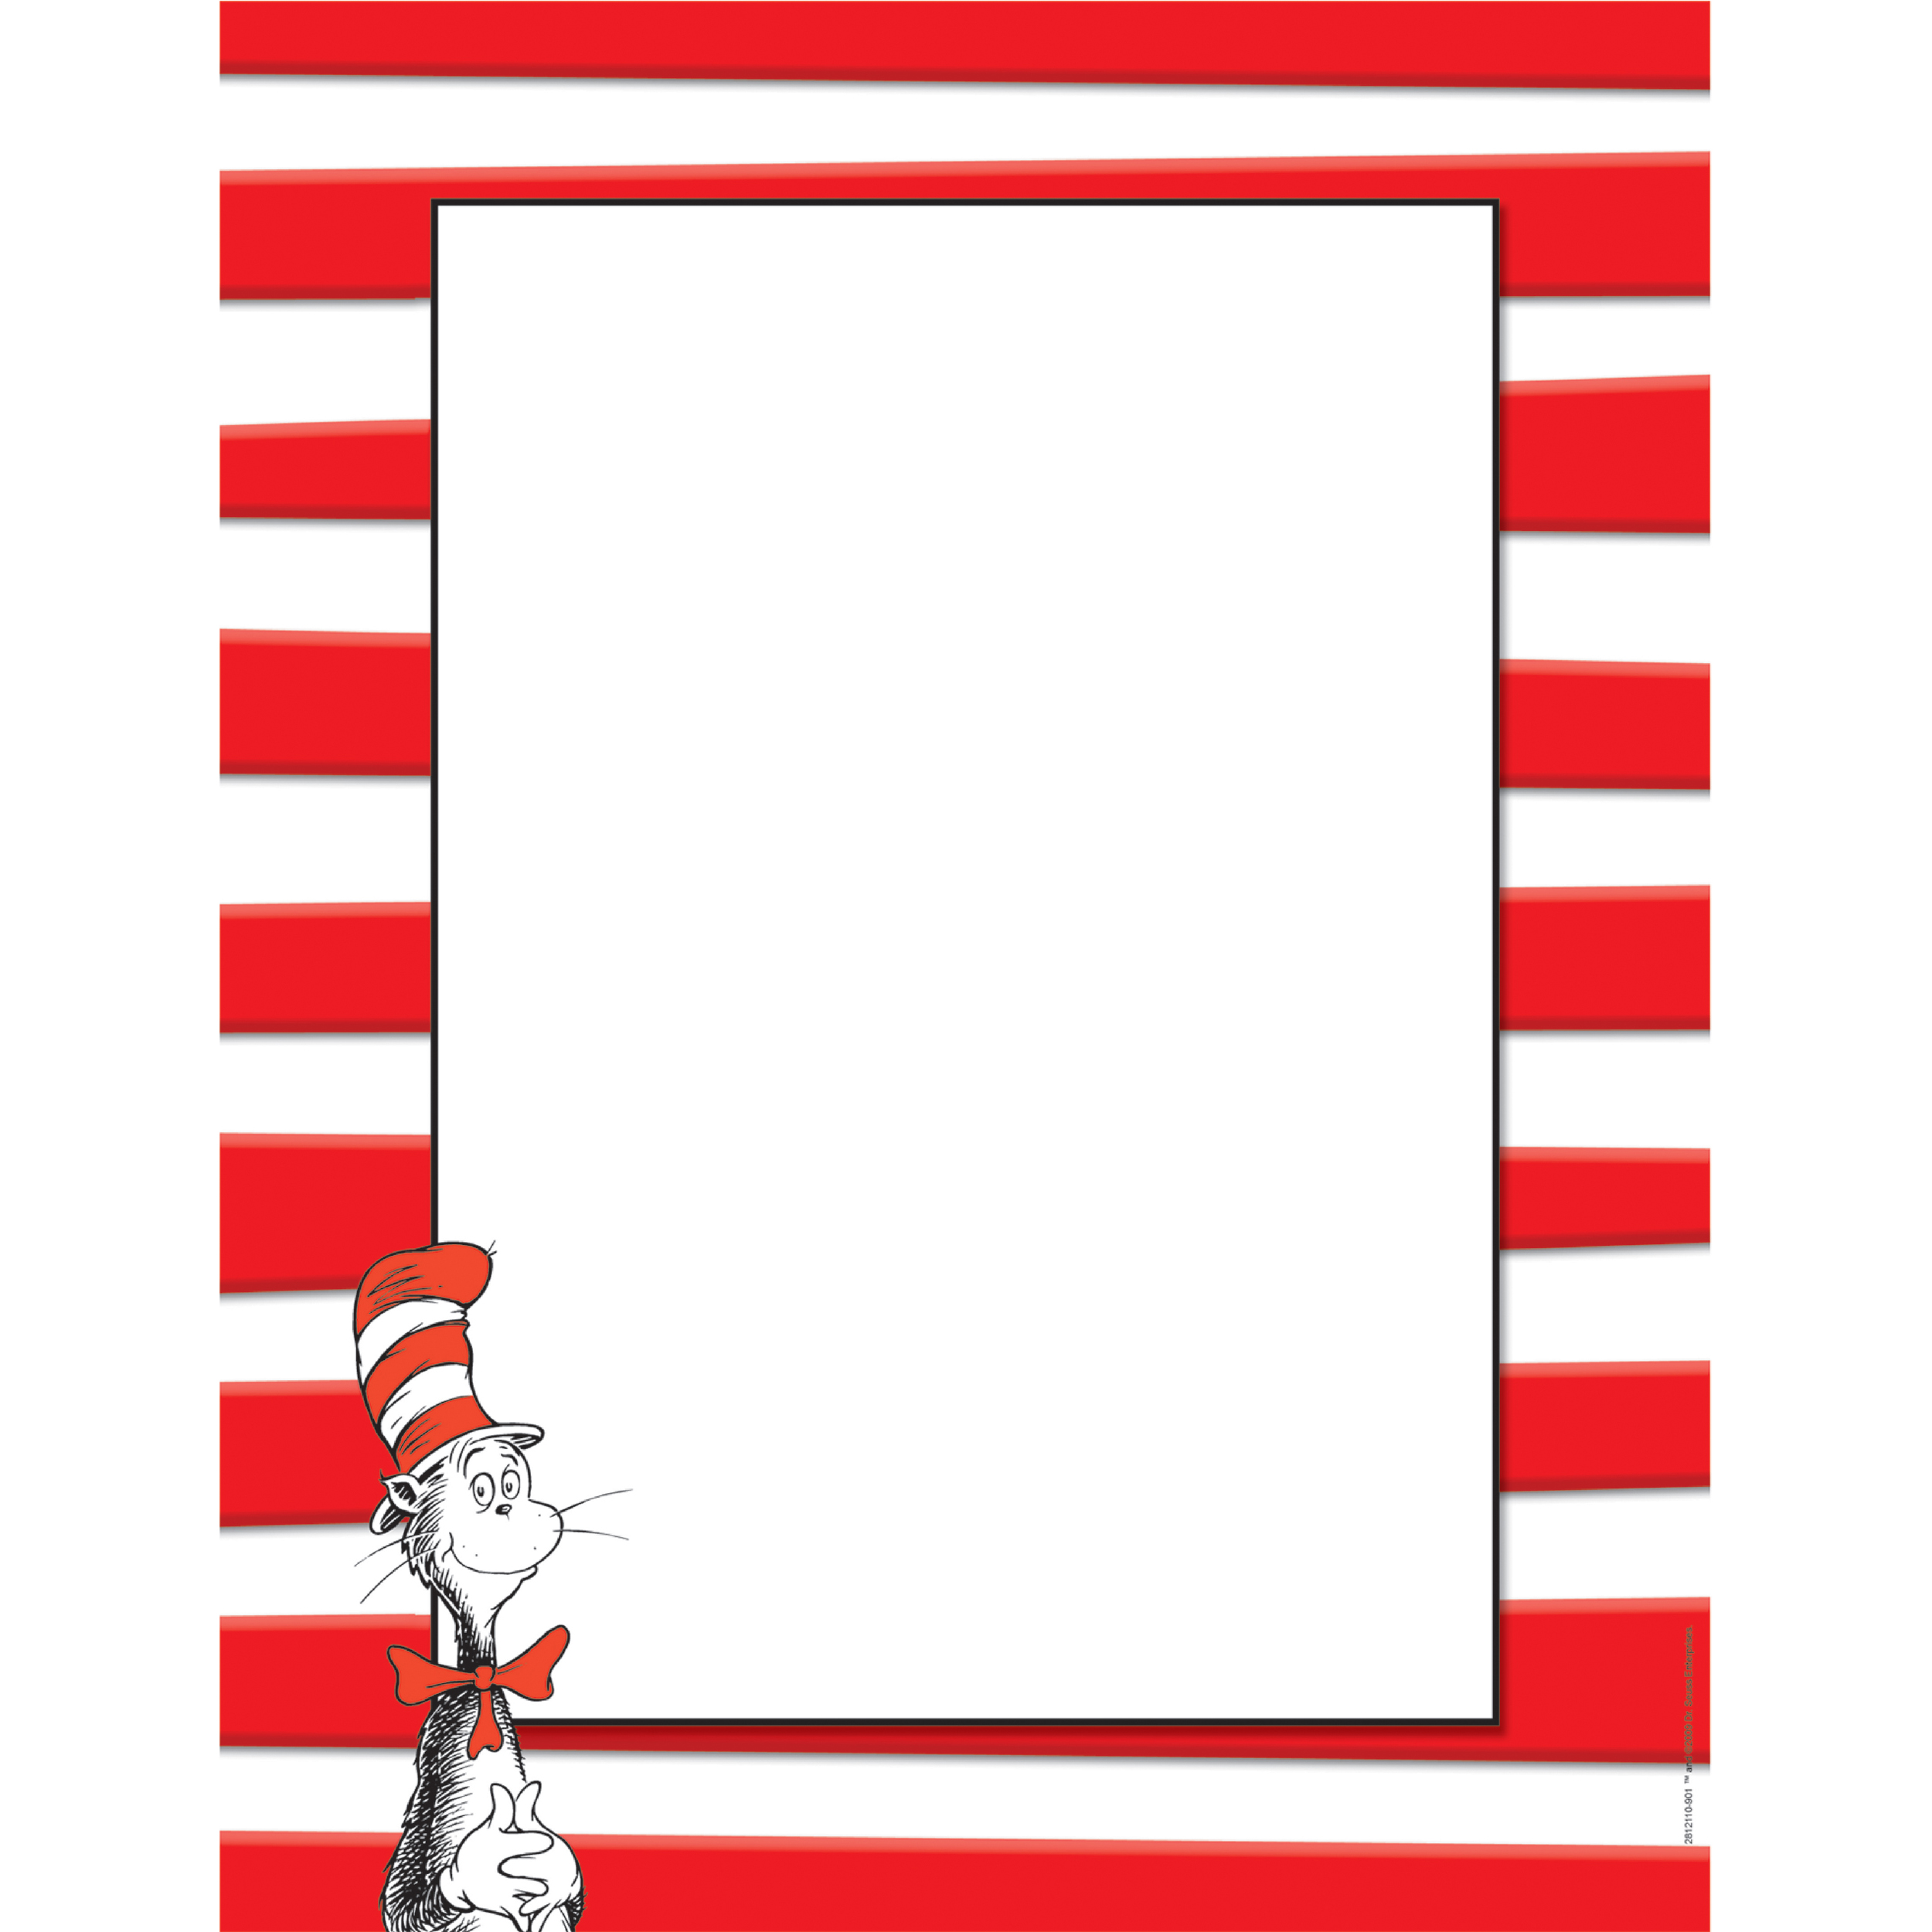 Dr Seuss Page Border Free download on ClipArtMag